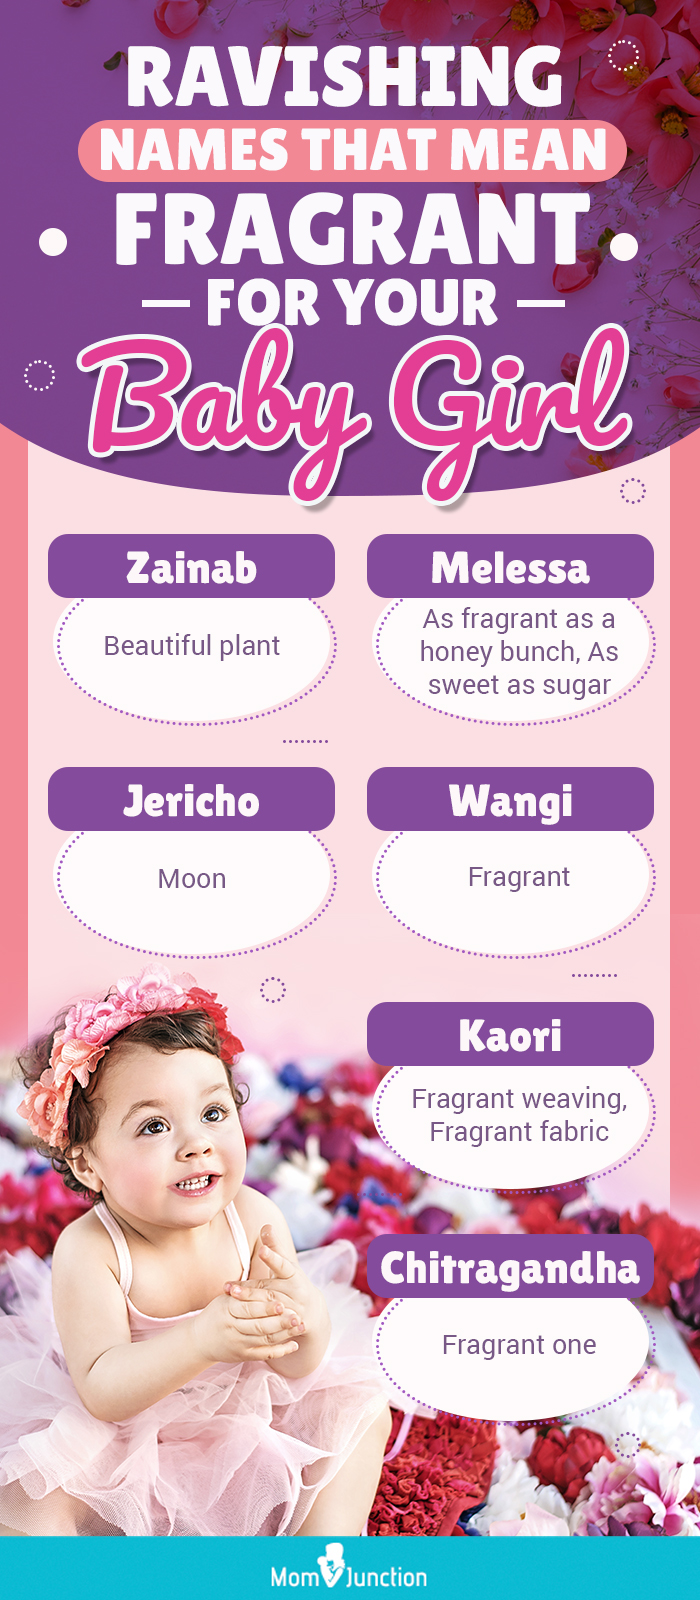 ravishing names that mean fragrant for your baby girl (infographic)